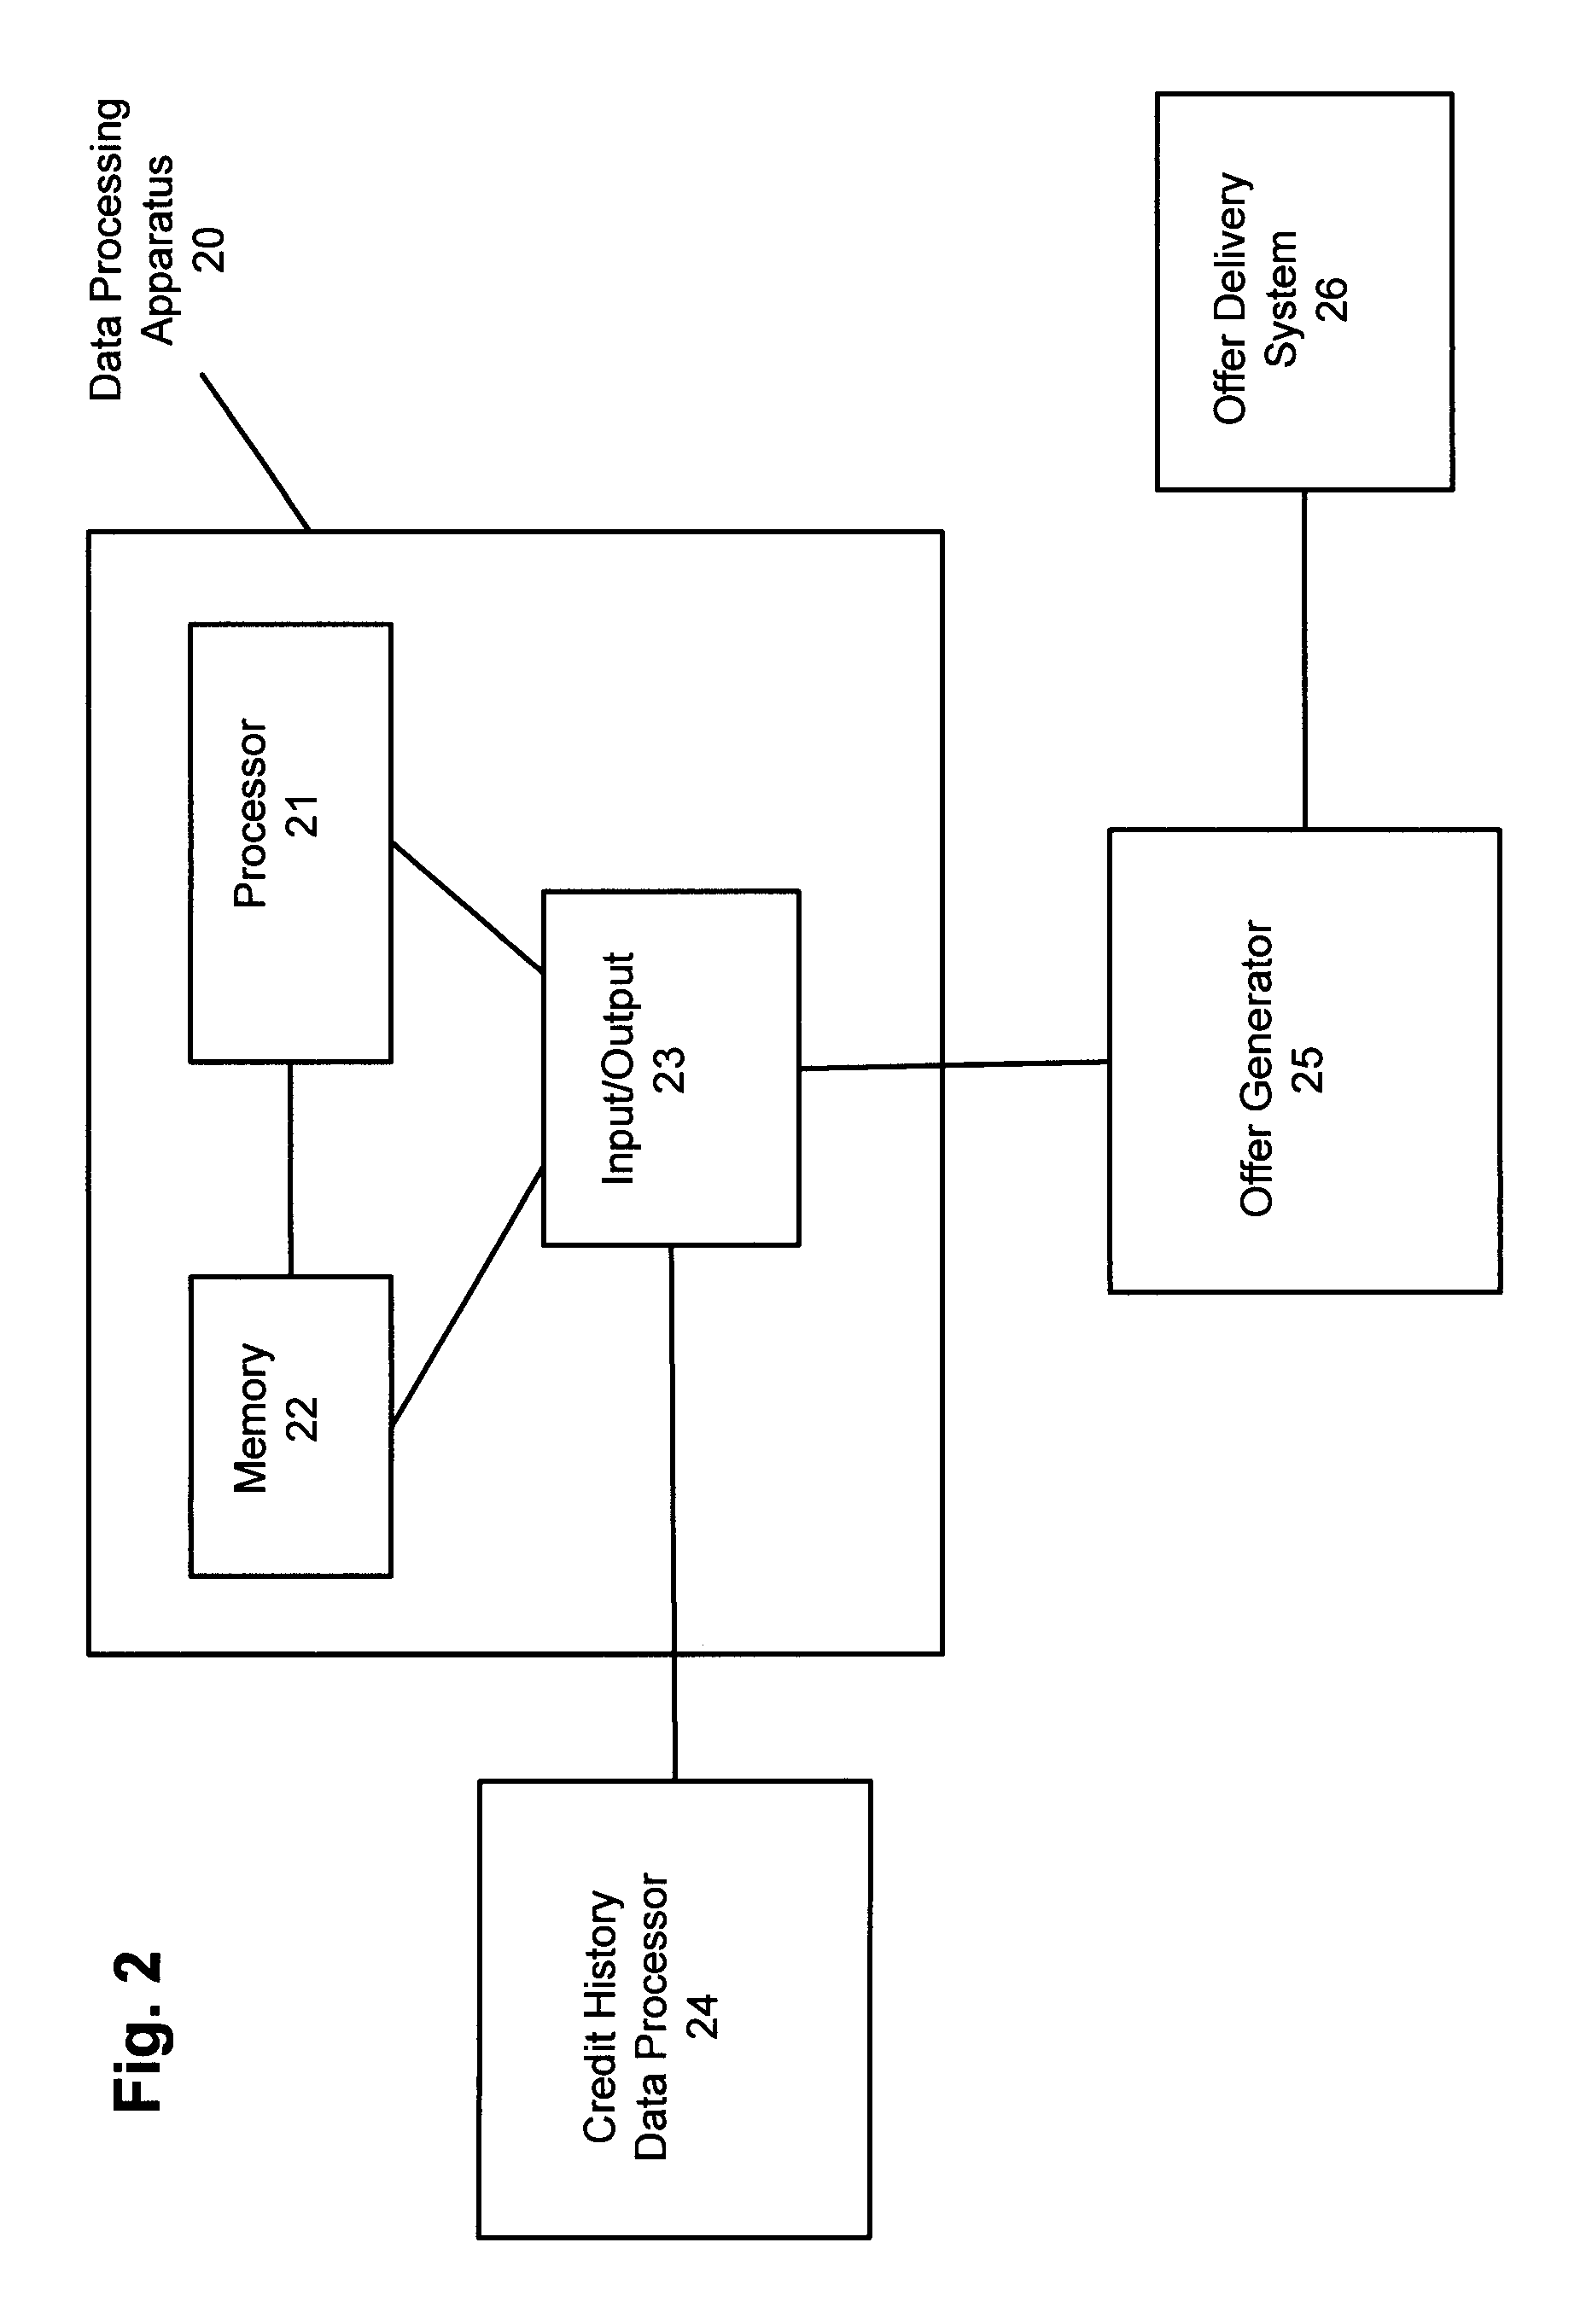 System and method for offering risk-based interest rates in a credit instutment